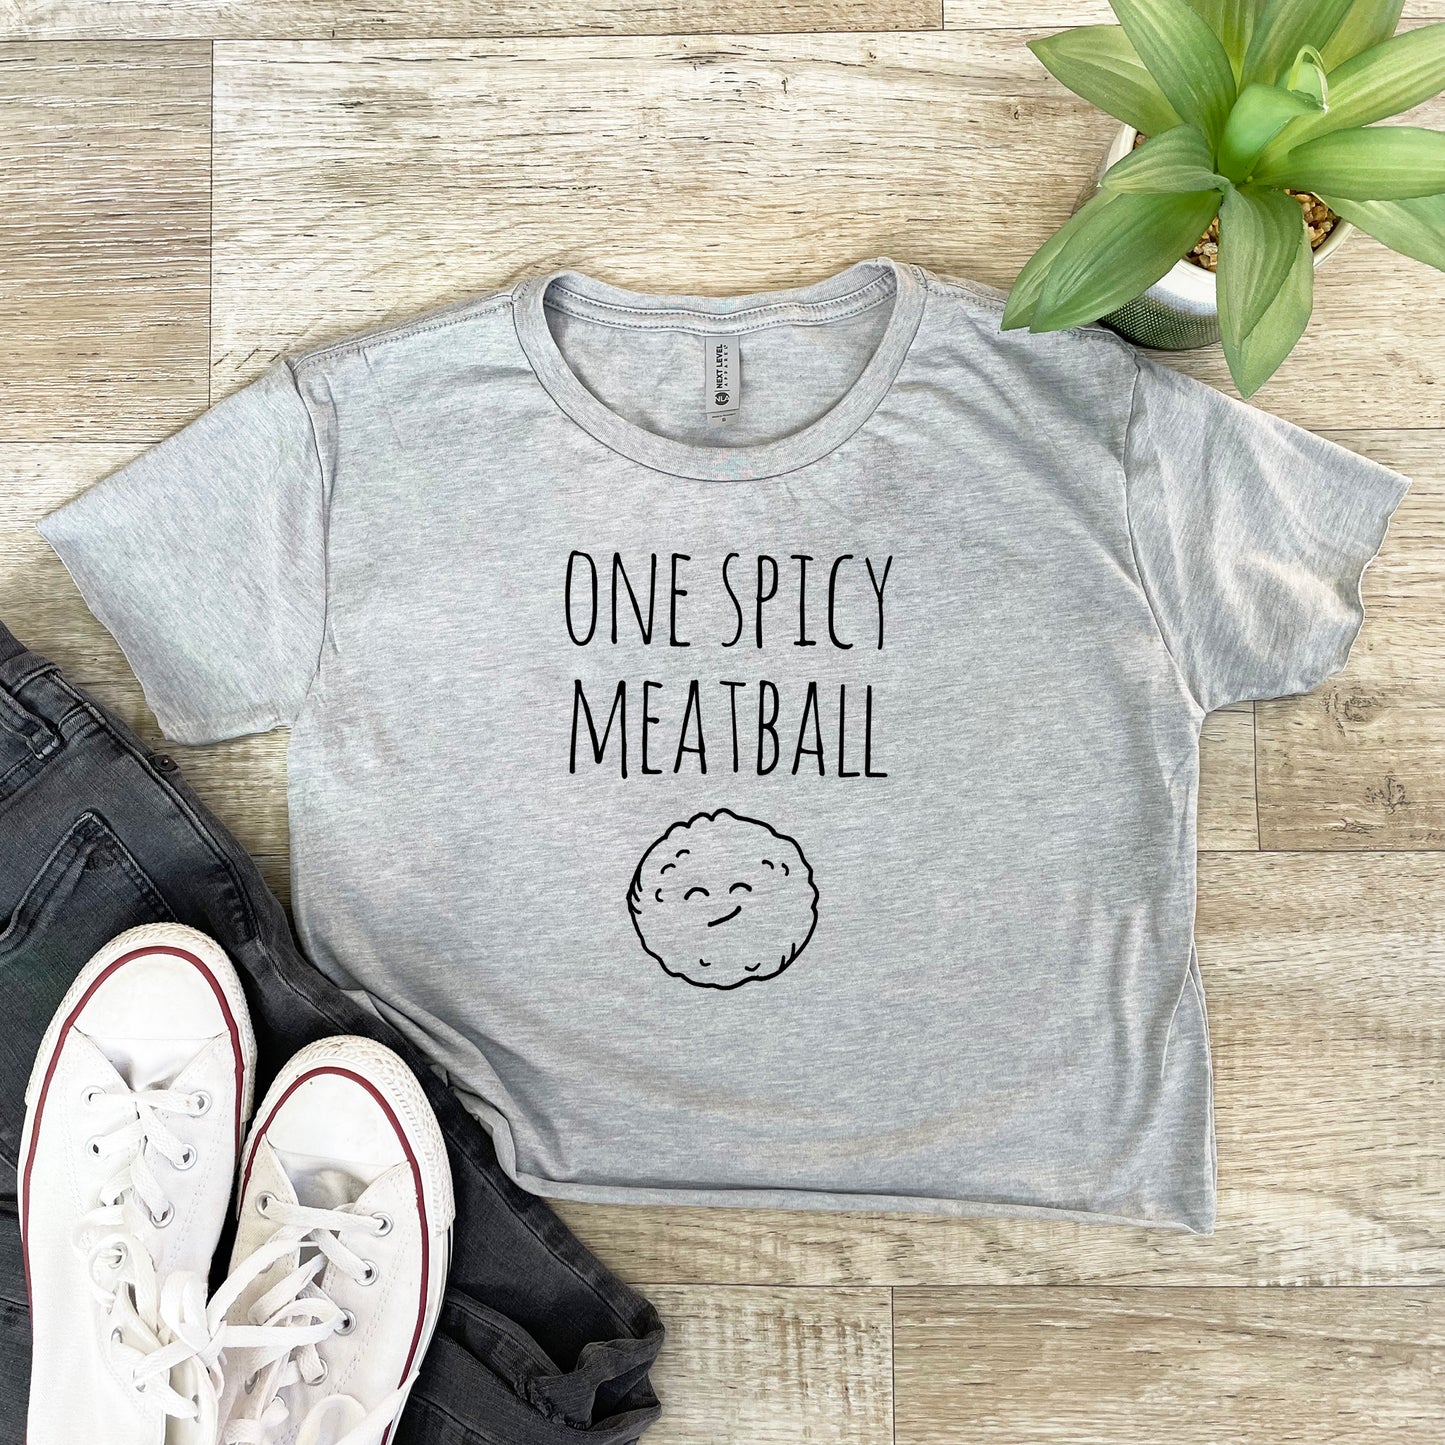 One Spicy Meatball - Women's Crop Tee - Heather Gray or Gold